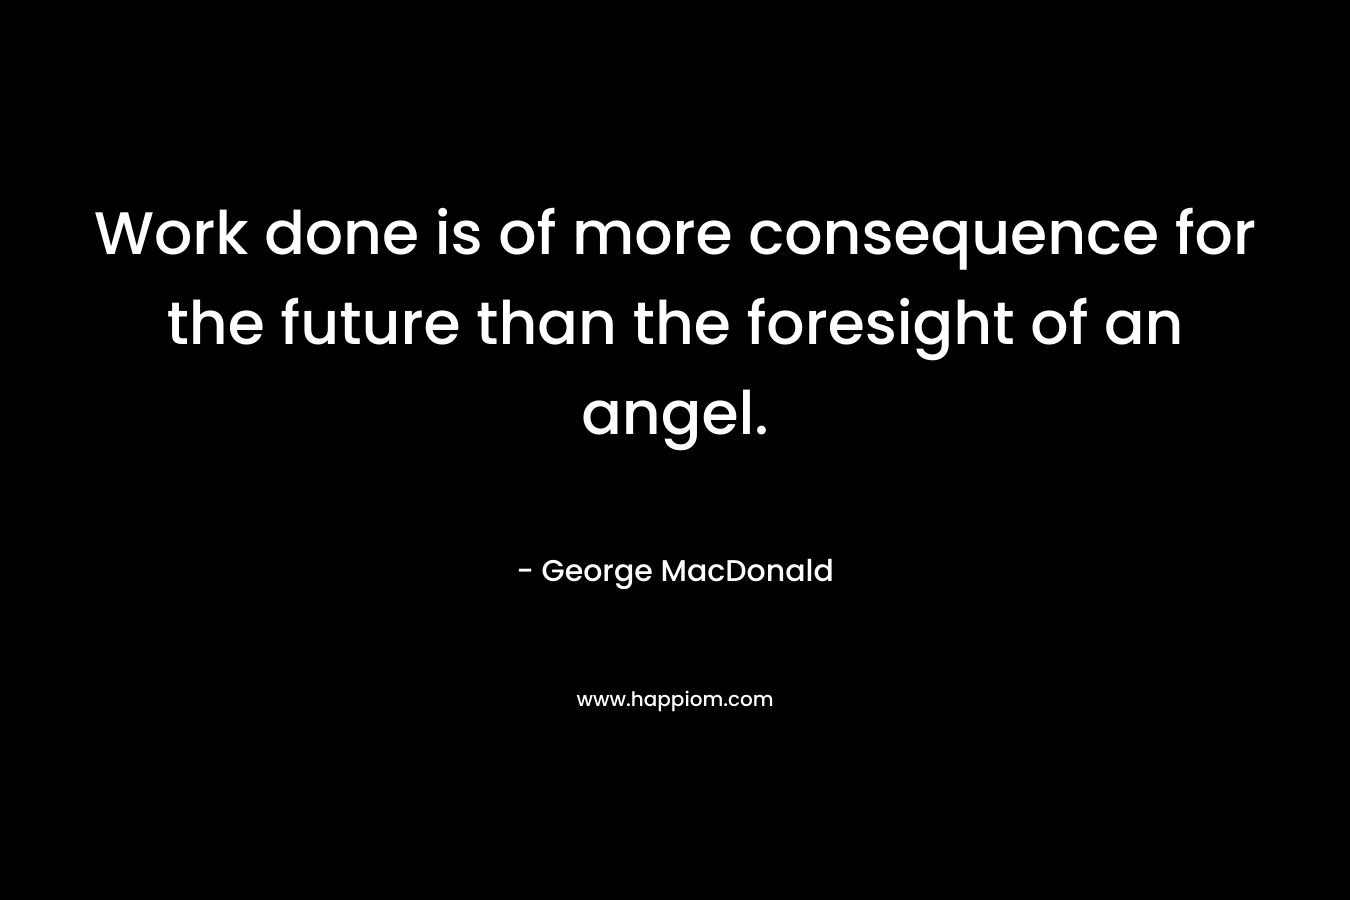 Work done is of more consequence for the future than the foresight of an angel. – George MacDonald